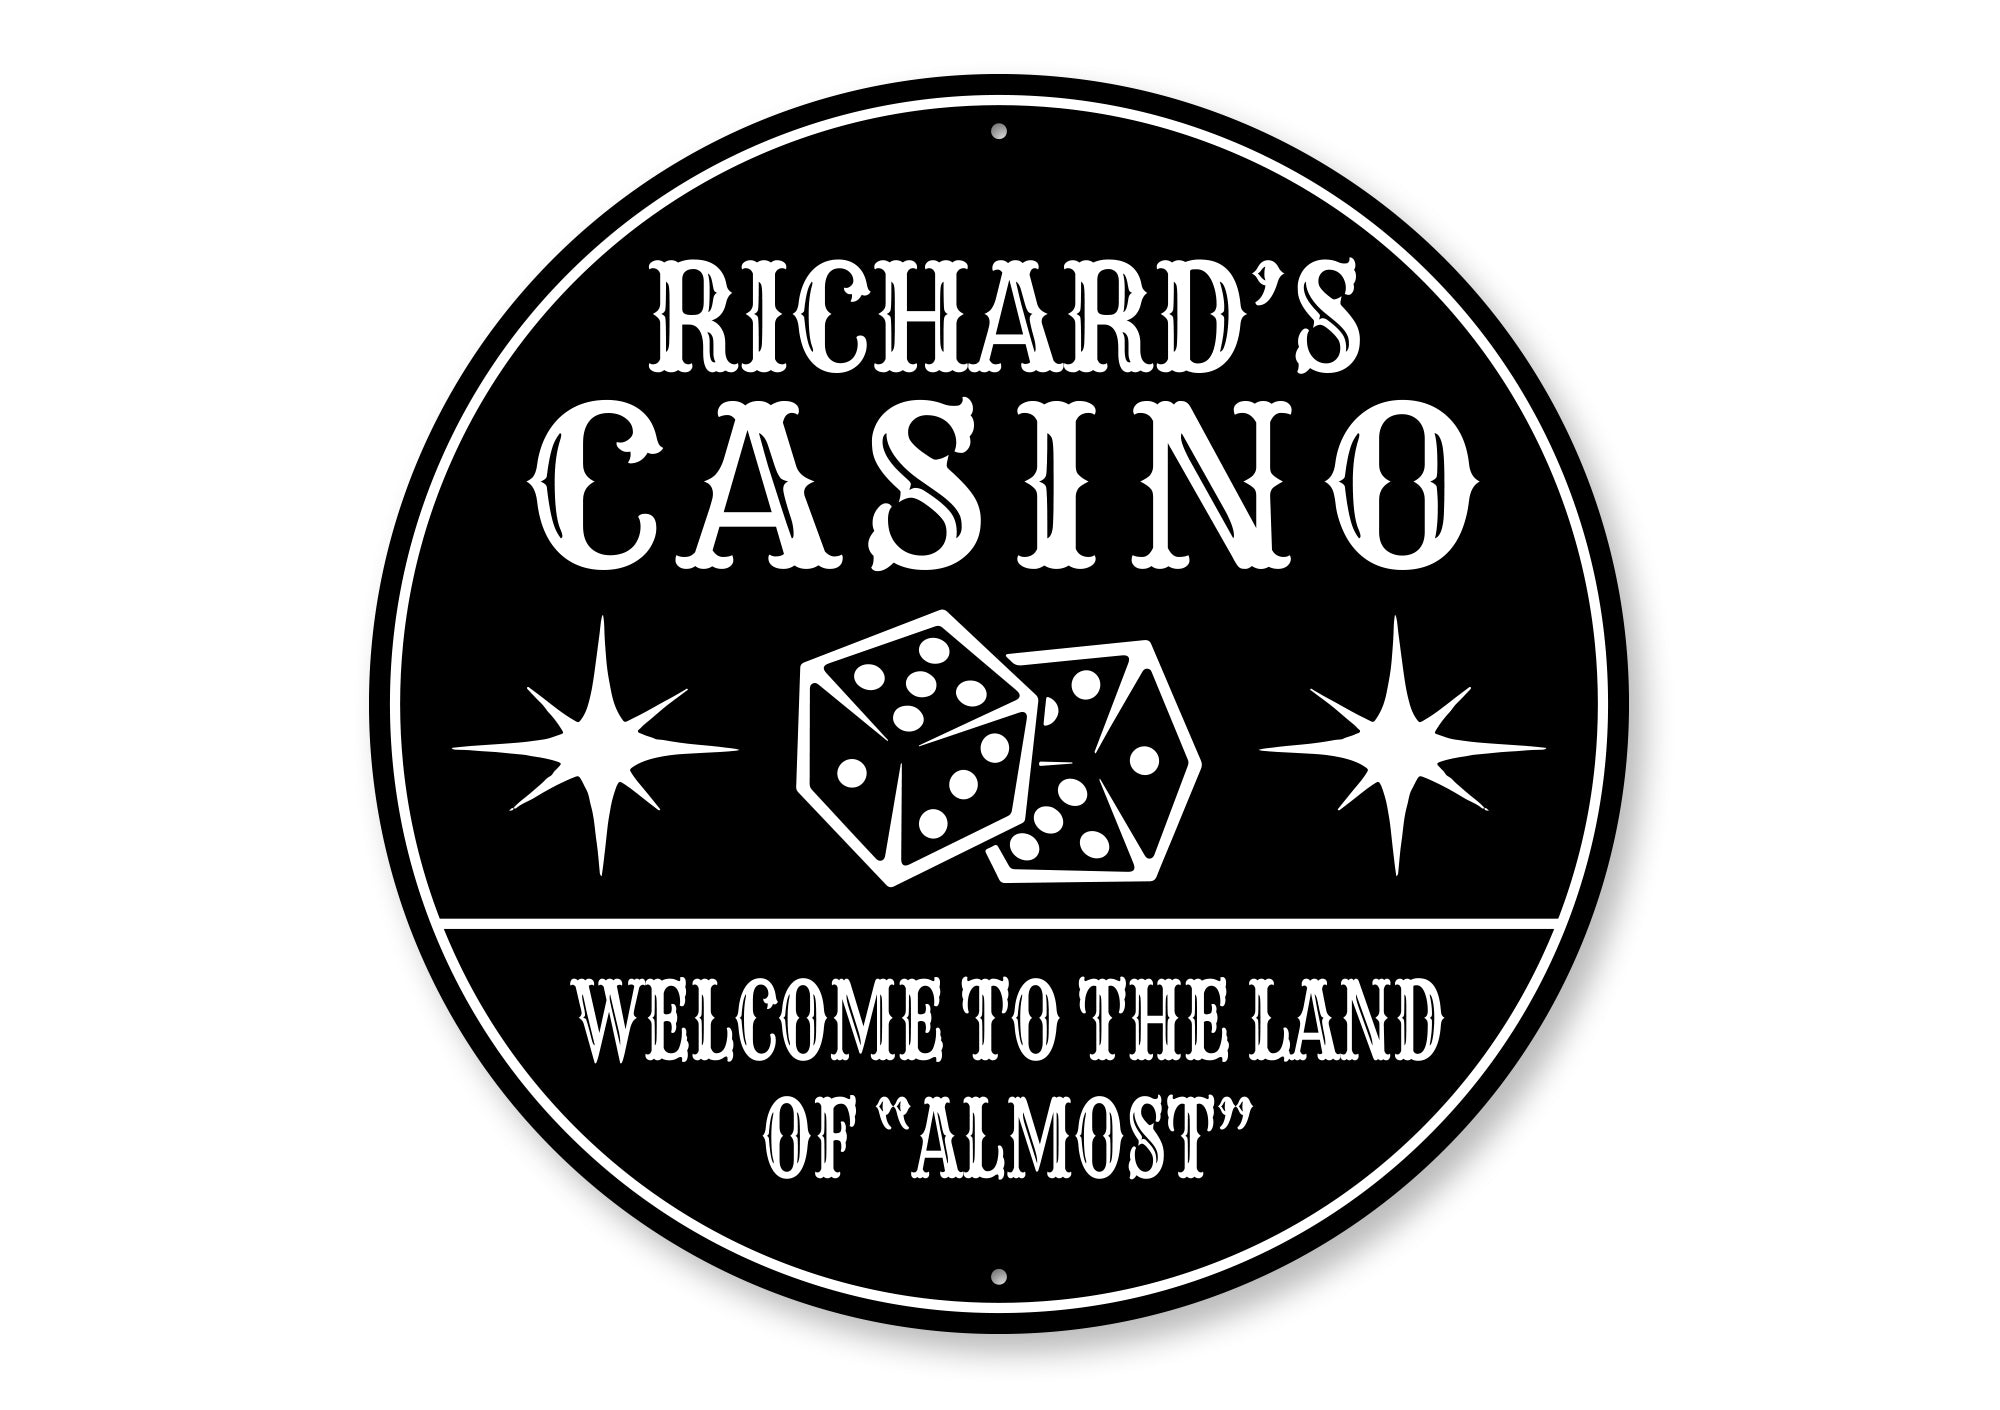 Casino Welcome To The Land Of Almost Sign